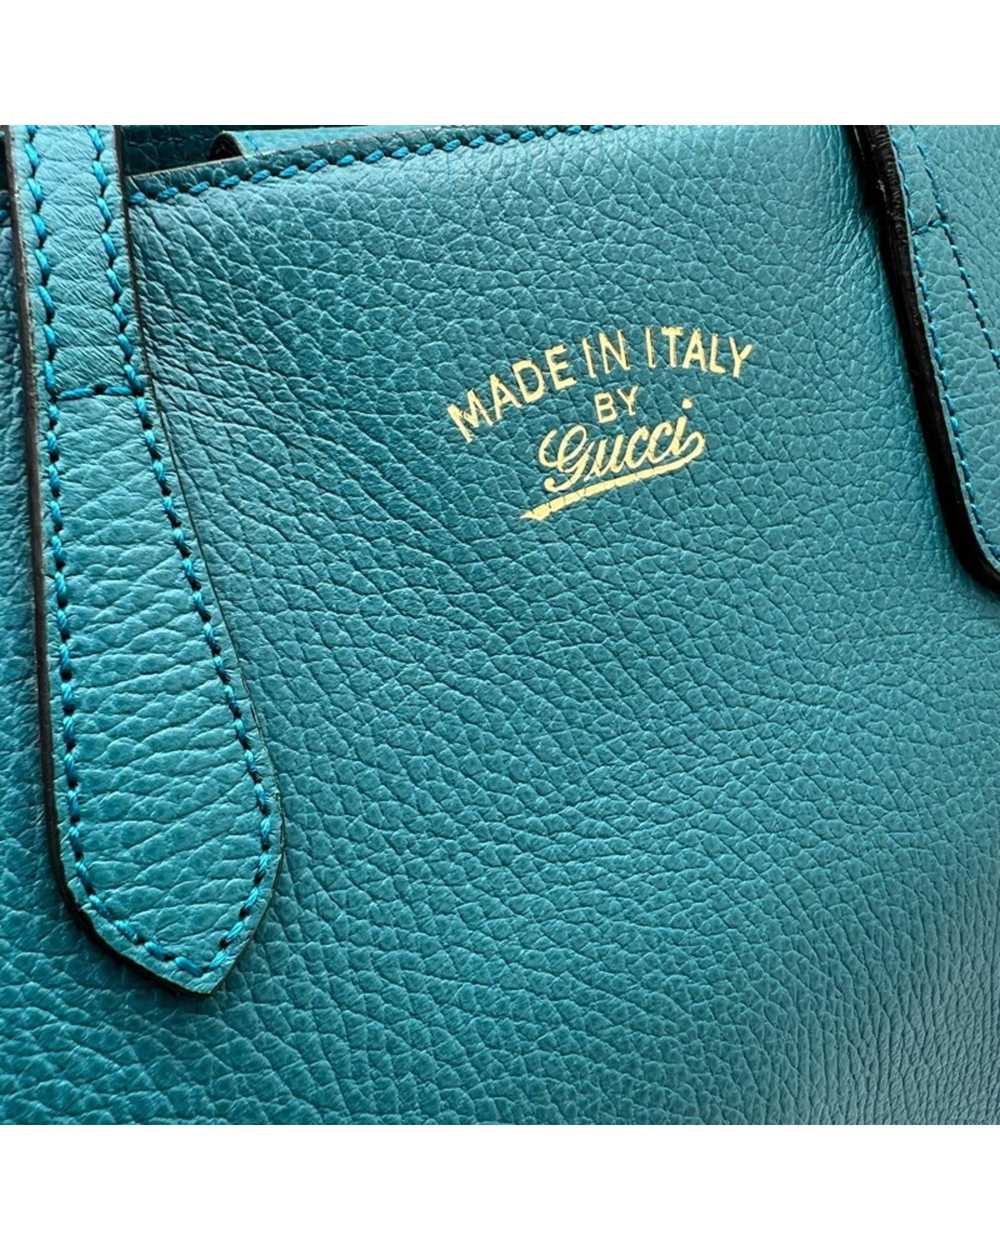 Gucci Blue Leather Swing Bag - image 6